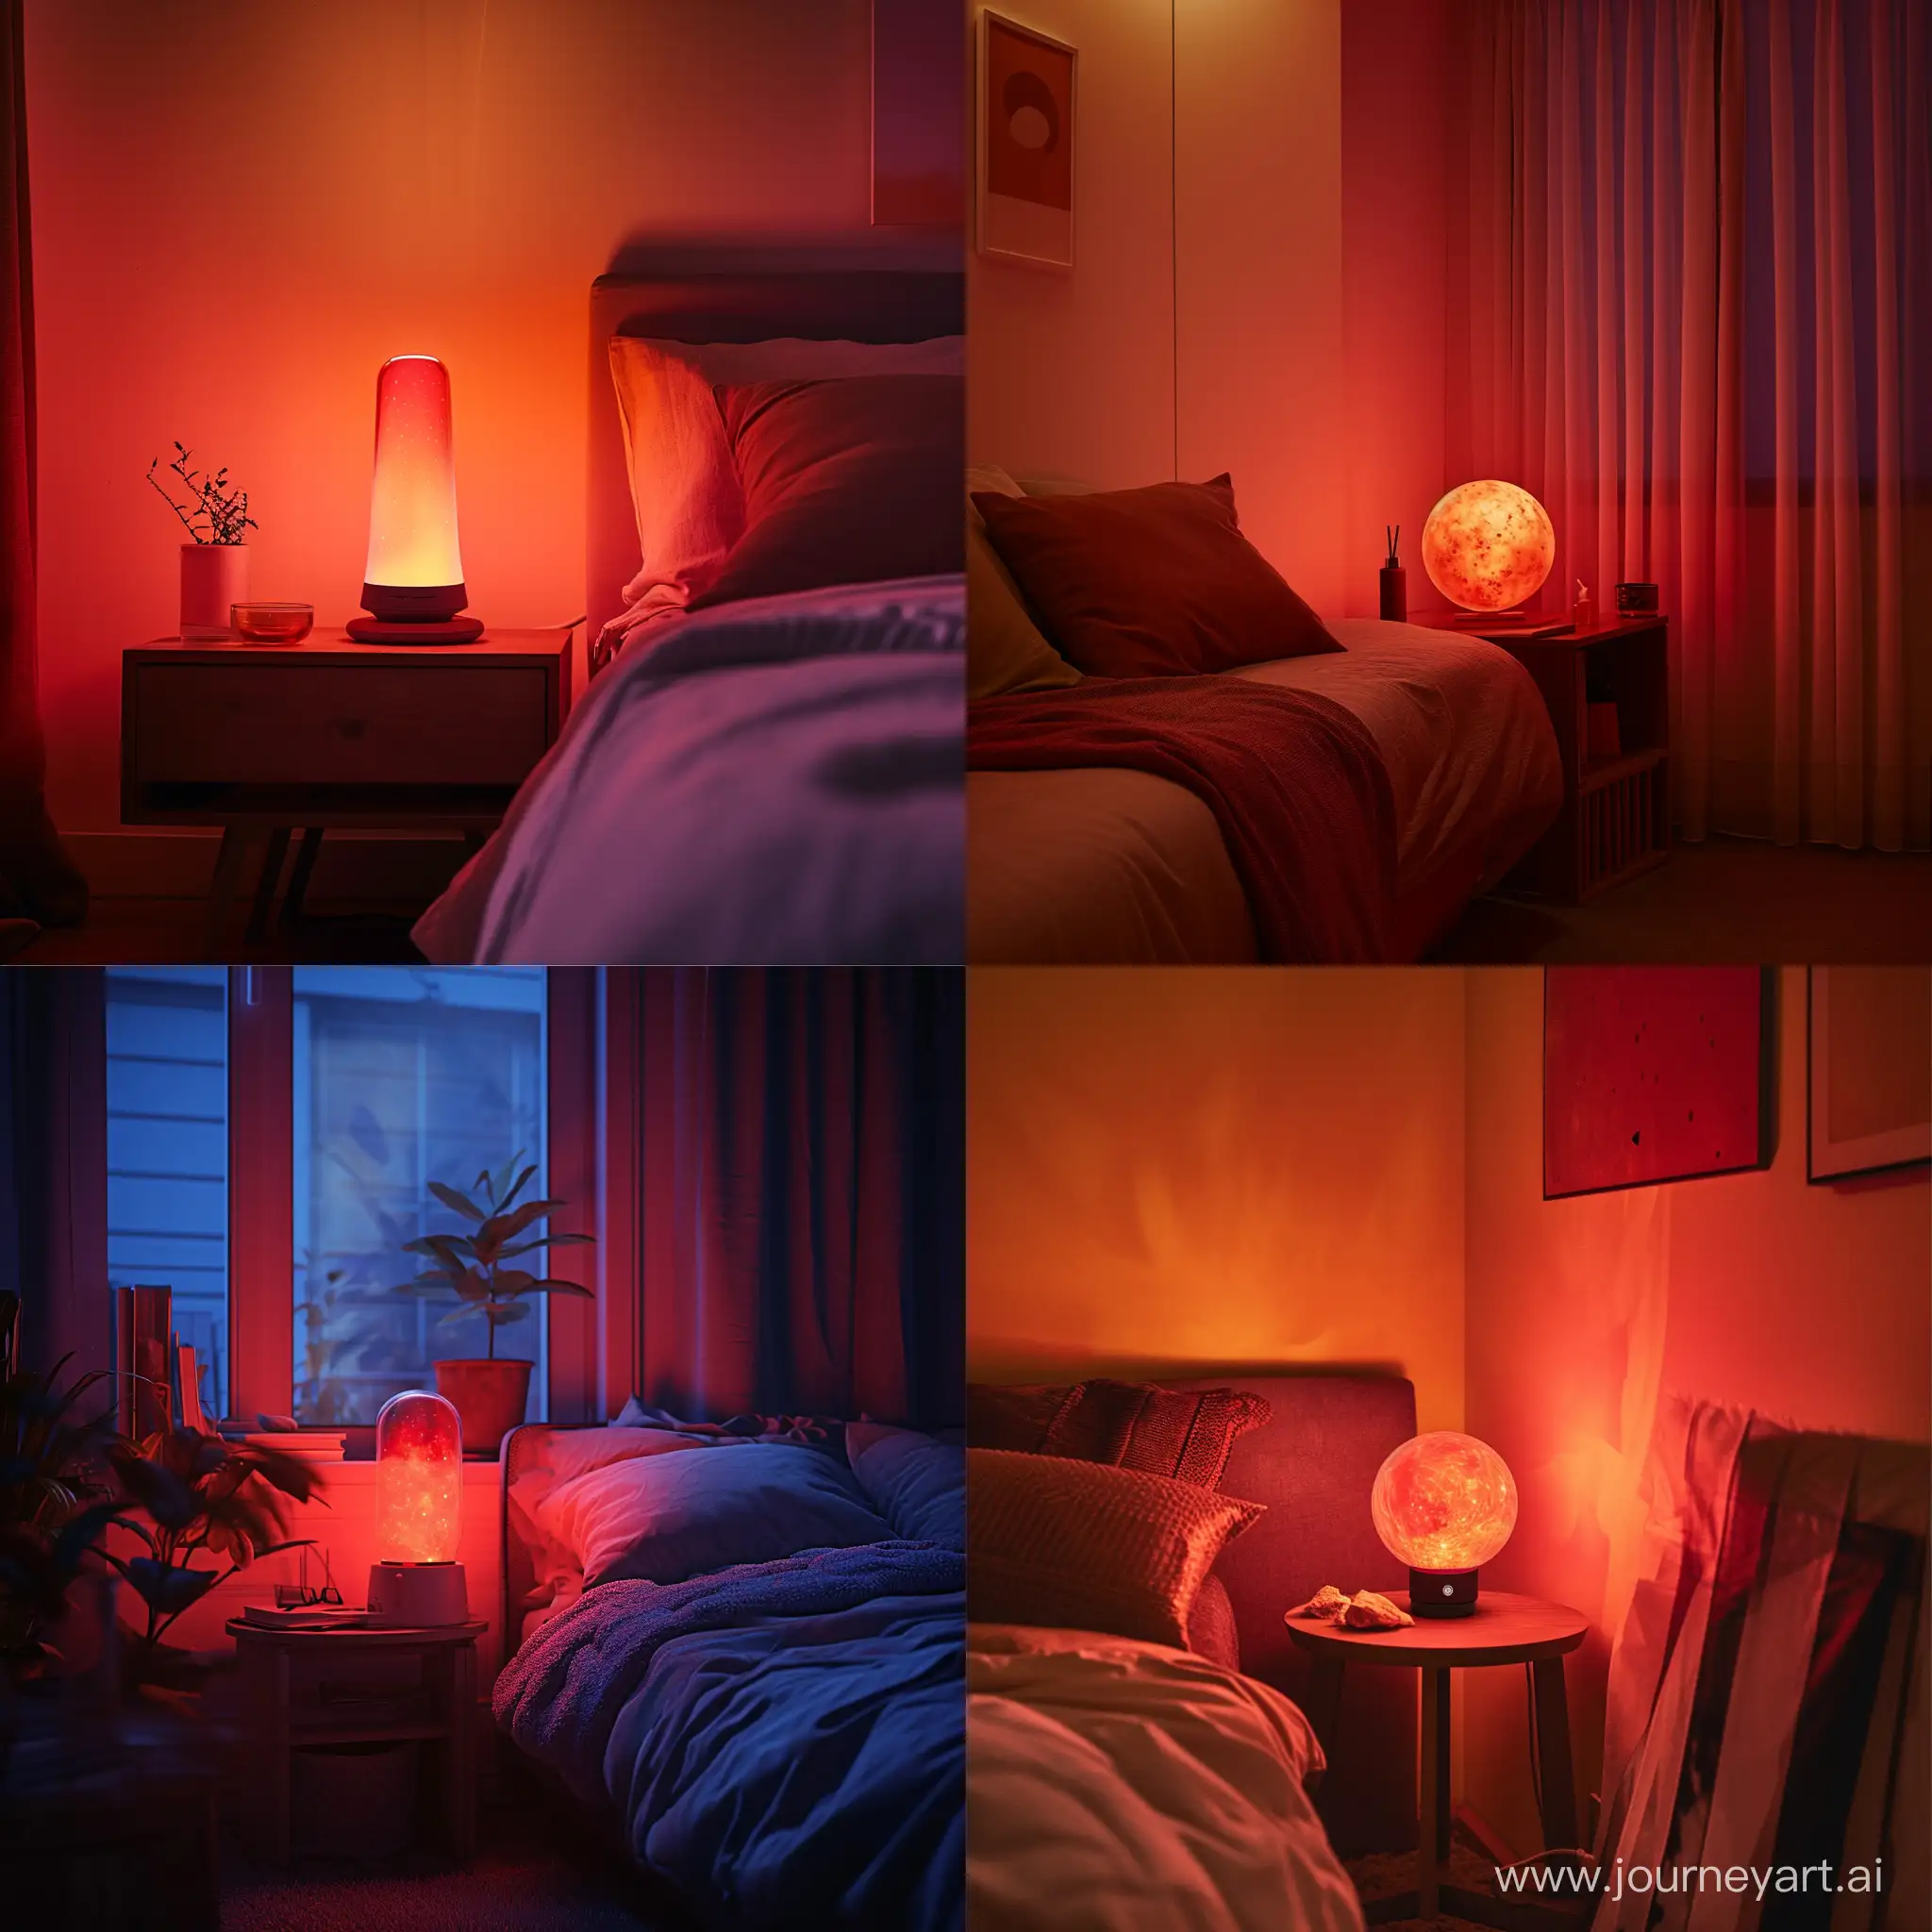 Cozy-Realistic-Bedroom-Illuminated-by-Nebula-Red-Light-Therapy-Lamp-at-Night